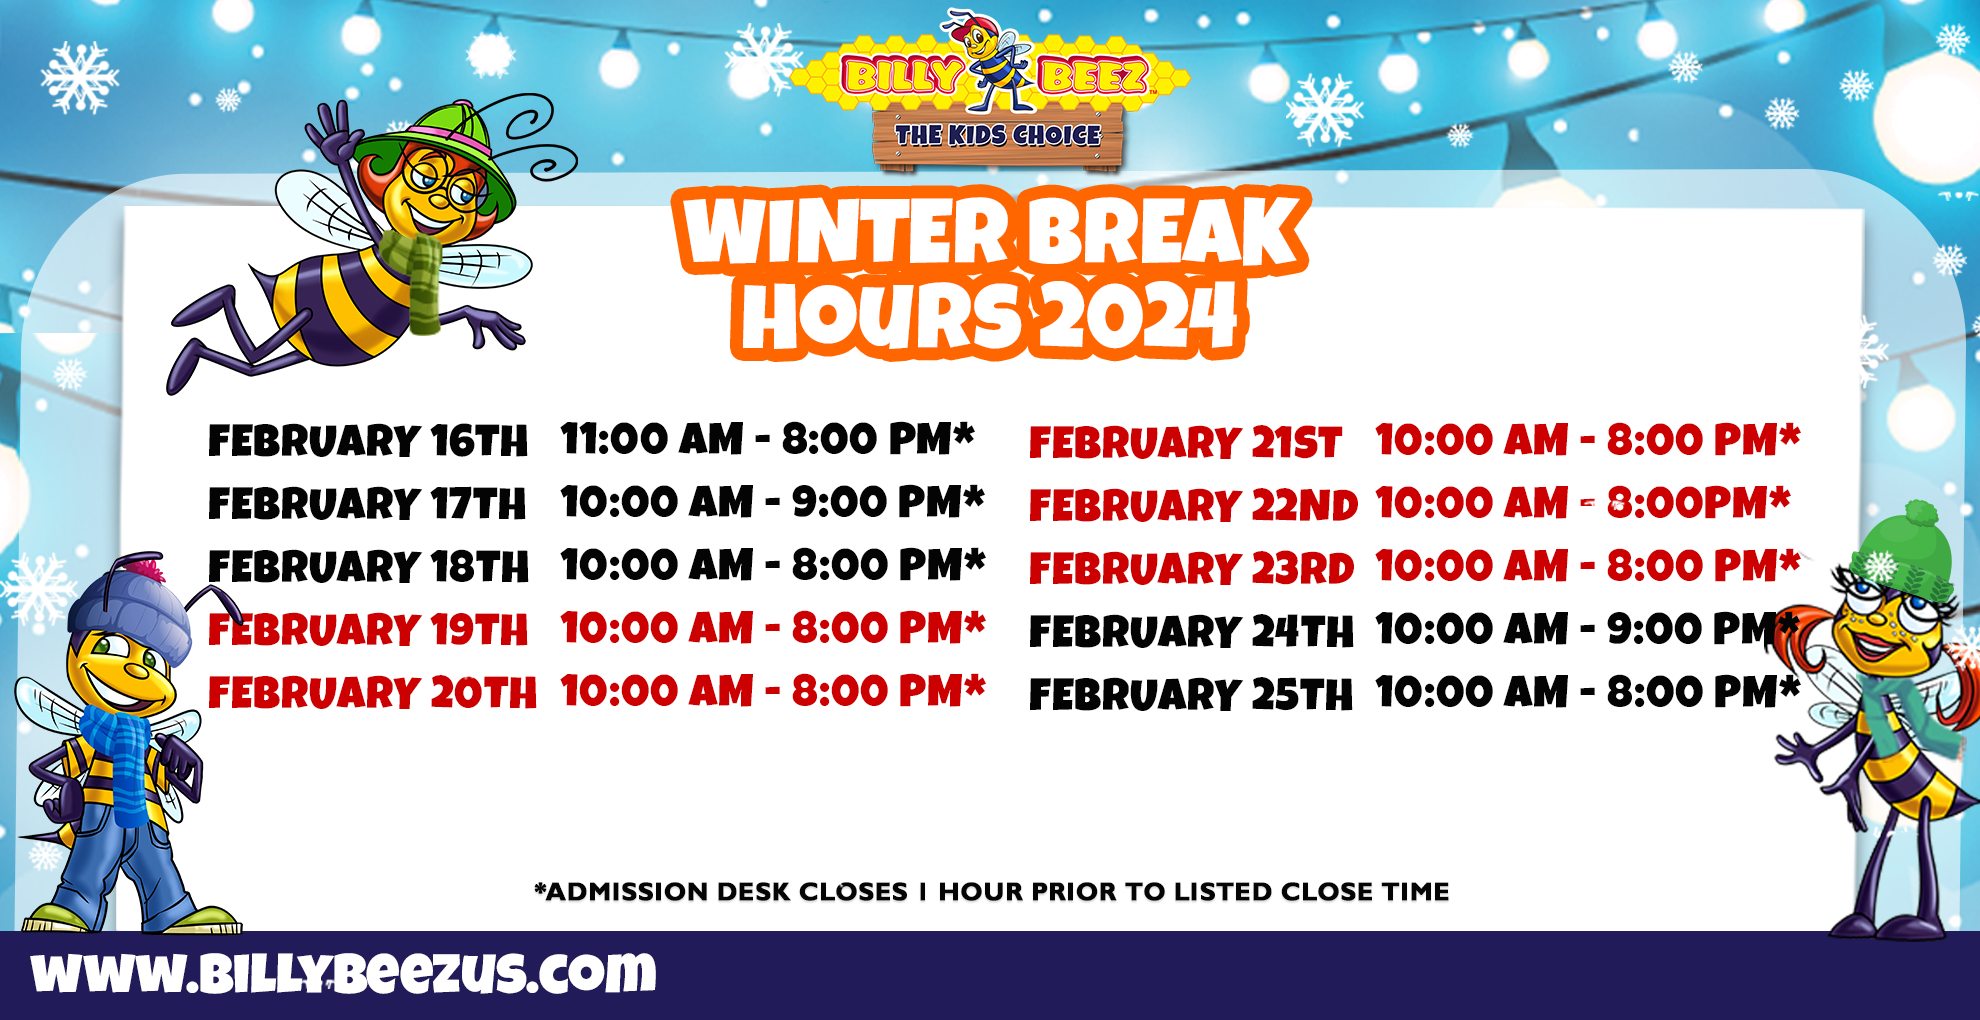 Billy Beez The Kids Choice Billy Beez Kingston Collection Winter Break Hours 2024 February 16th 11:00am - 8:00pm* February 17th 10:00am - 9:00pm* February 18th 10:00am - 8:00pm* February 19th 10:00am- 8:00pm* February 20th 10:00am - 8:00pm* February 21st 10:00am - 8:00pm* Febraury 22nd 10:00am - 8:00pm* February 23rd 10:00am - 8:00pm* February 24th 10:00am - 9:00pm* February 25th 10:00am - 8:00pm* *Admission desk closes 1 hour prior to listed close time* www.billybeezus.com